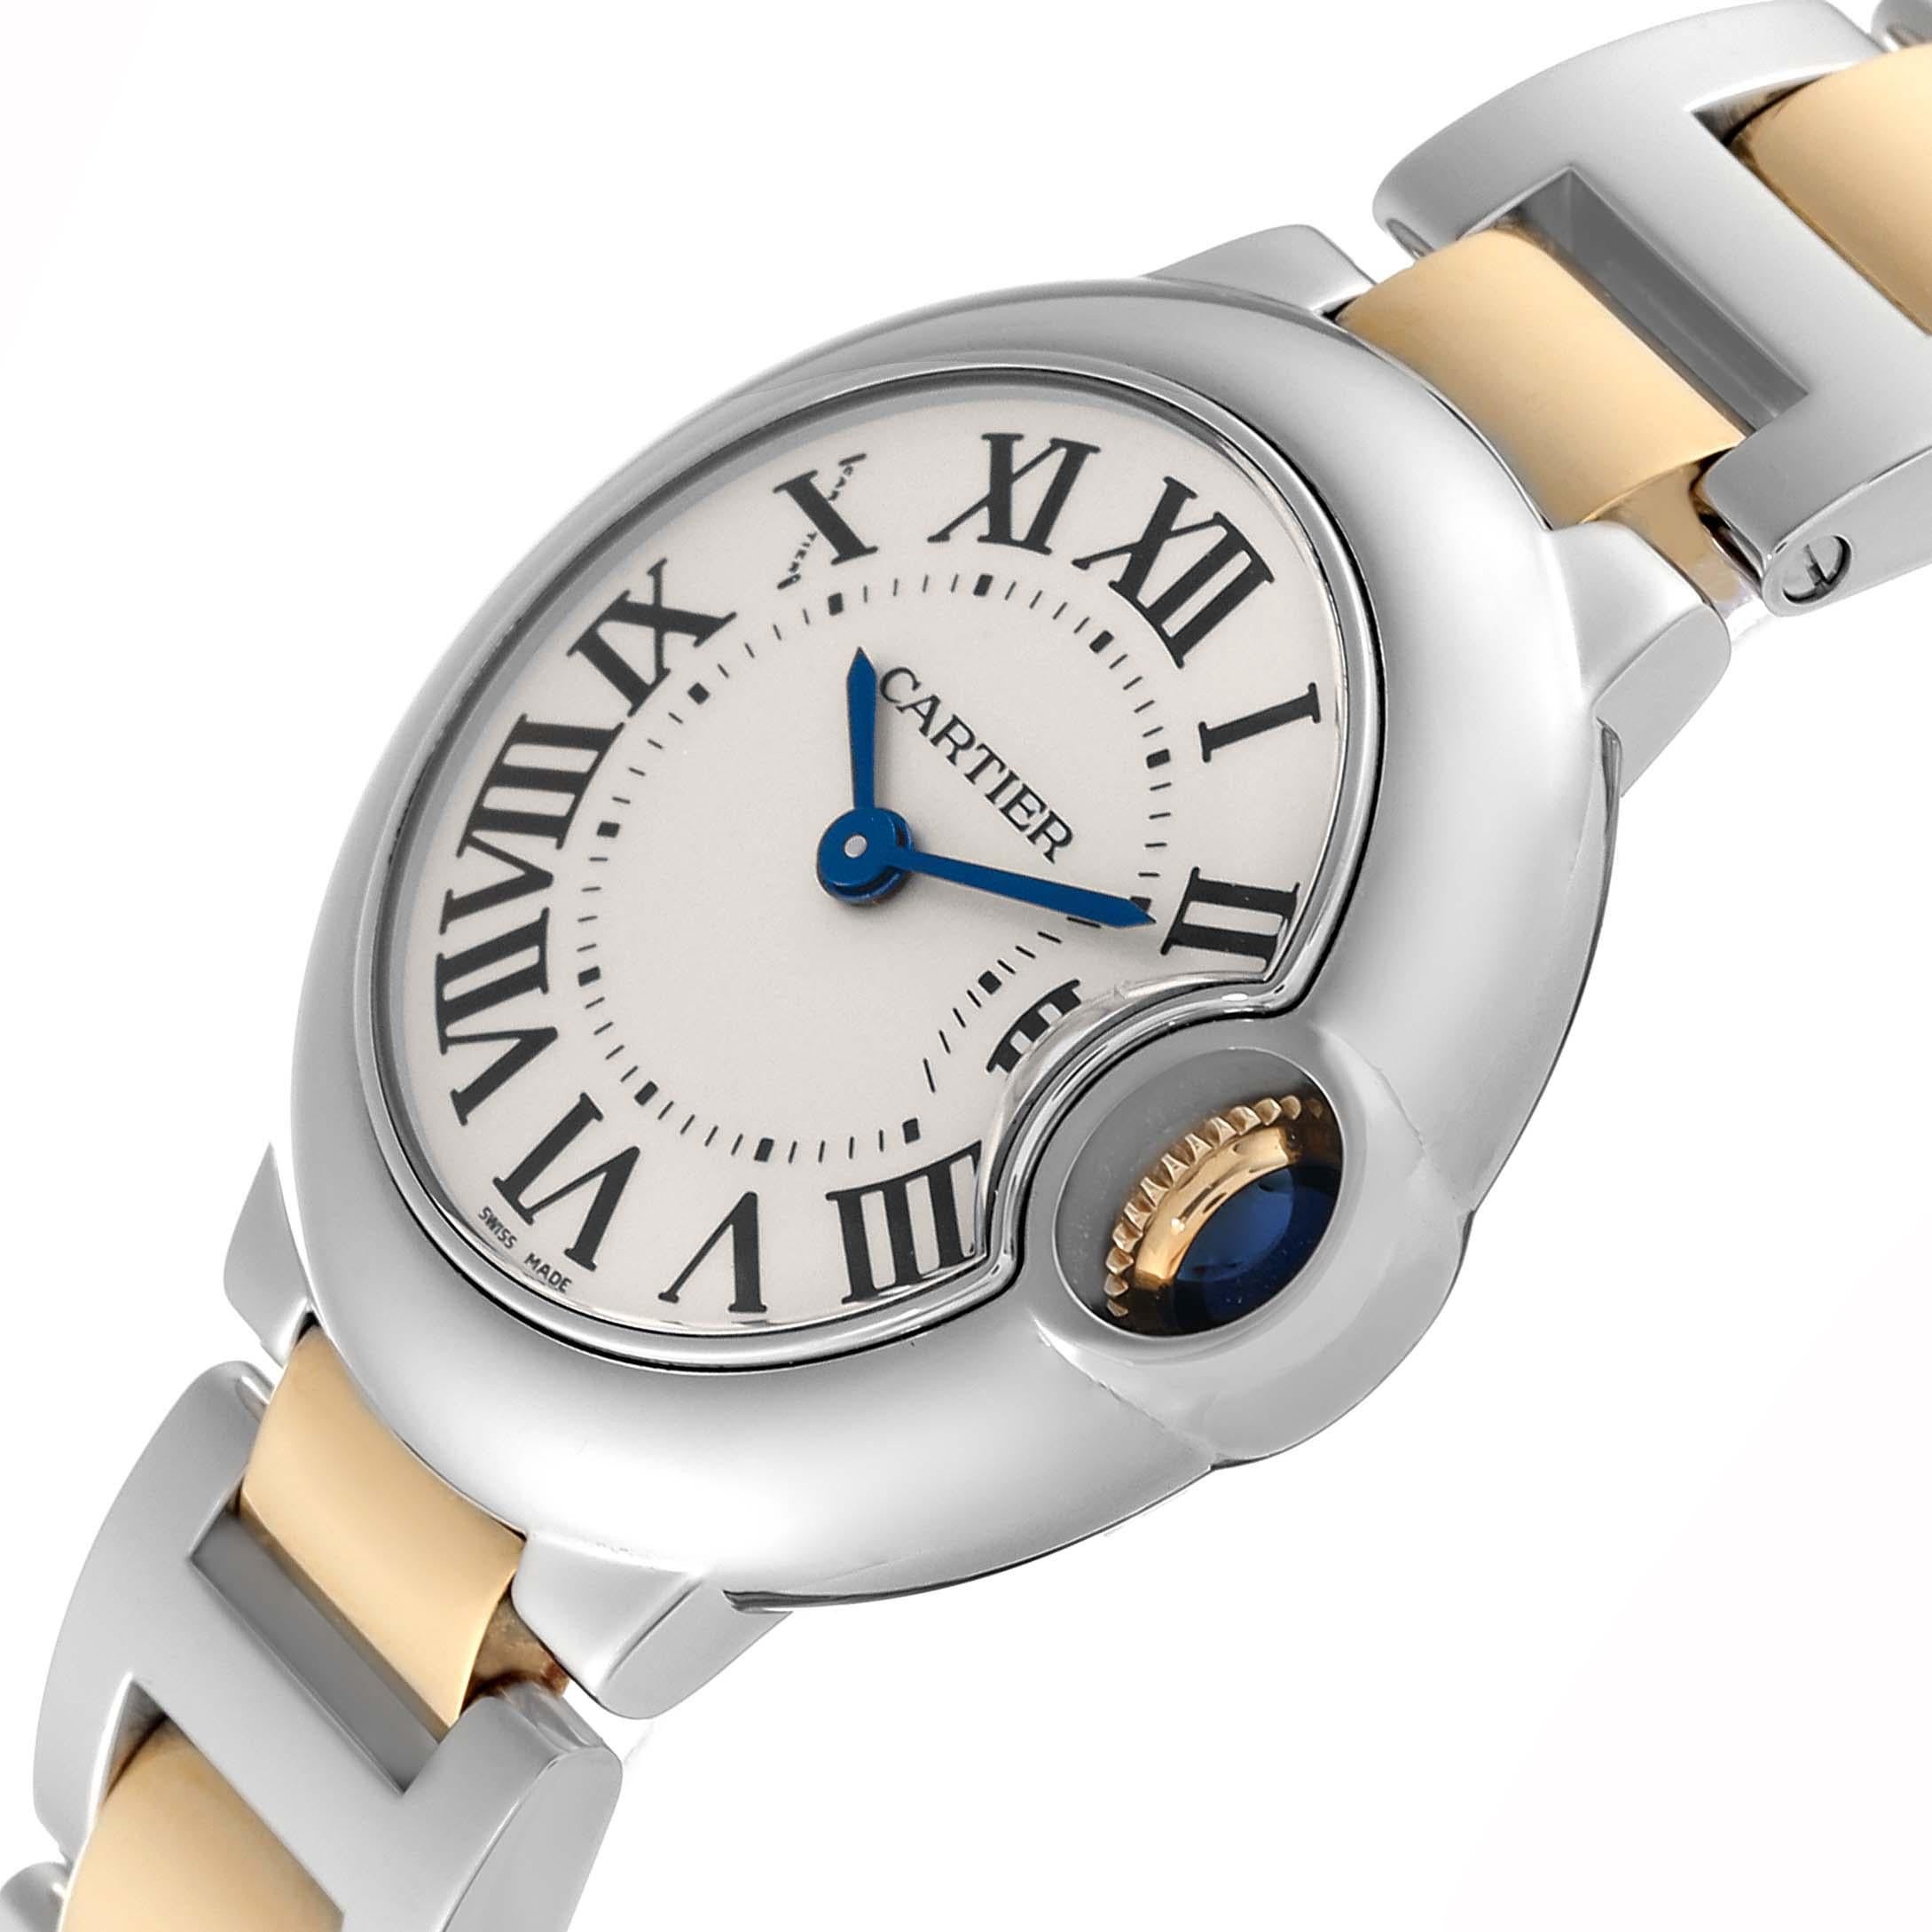 Cartier Ballon Bleu 28mm Steel Yellow Gold Ladies Watch W69007Z3. Quartz movement. Round stainless steel case 28.0 mm in diameter. Fluted 18k yellow gold crown set with a blue spinel cabochon. Stainless steel smooth bezel. Scratch resistant sapphire